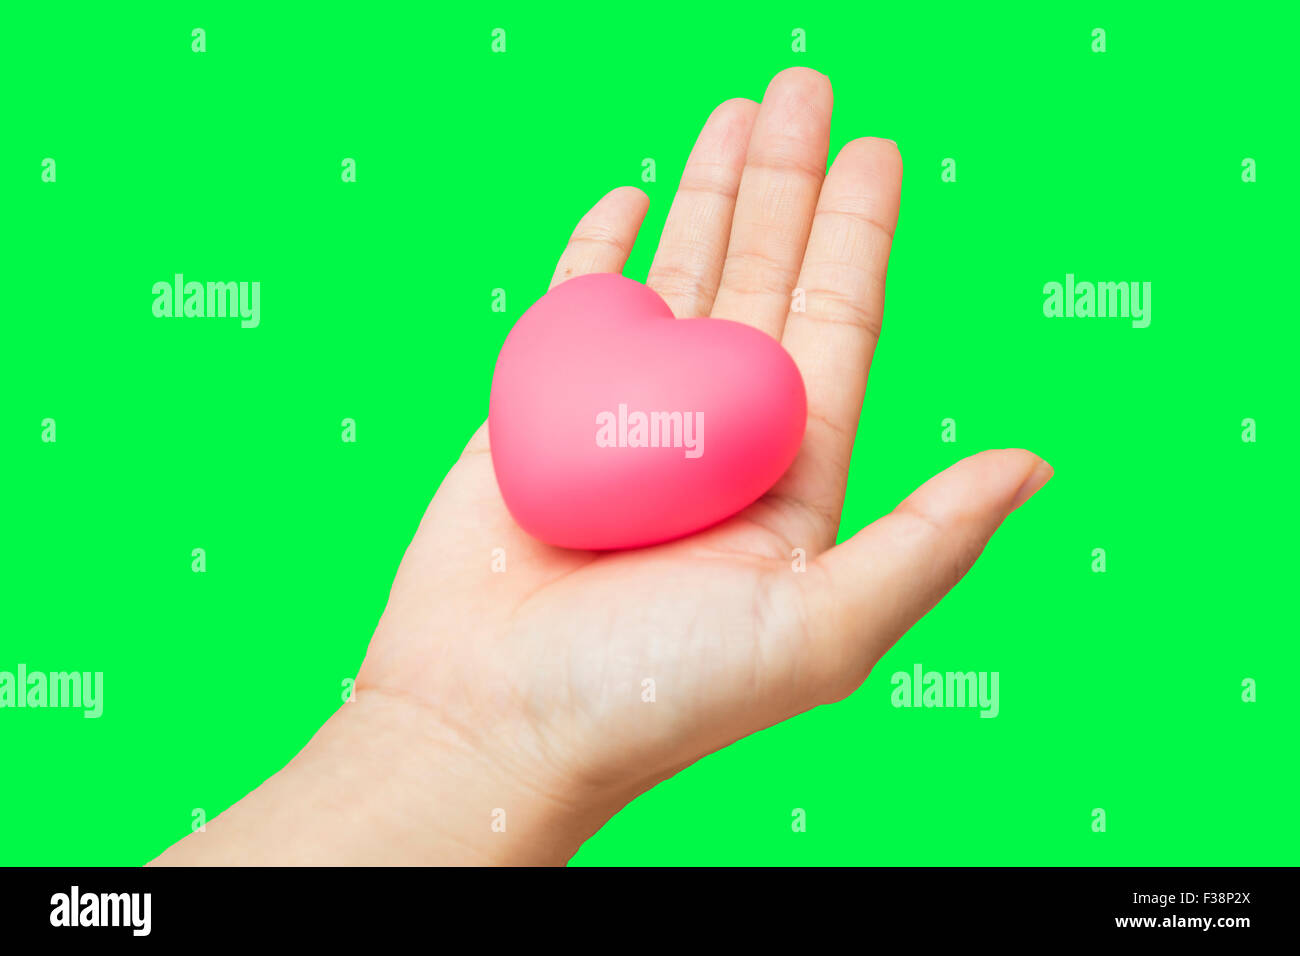 heart in hands Isolated on green screen chroma key background. Stock Photo